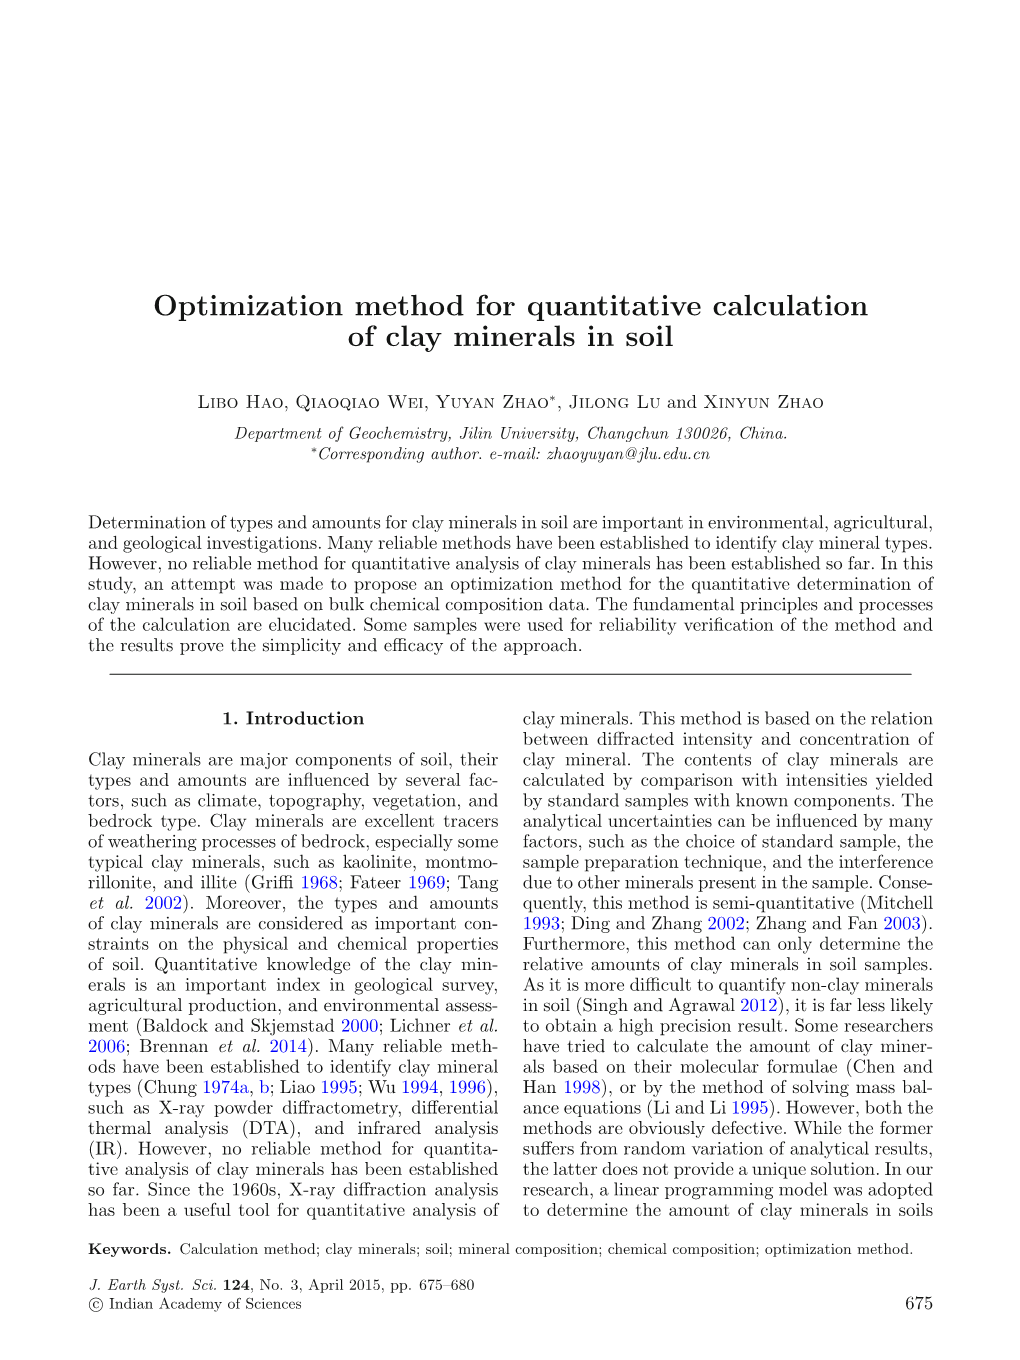 Optimization Method for Quantitative Calculation of Clay Minerals in Soil